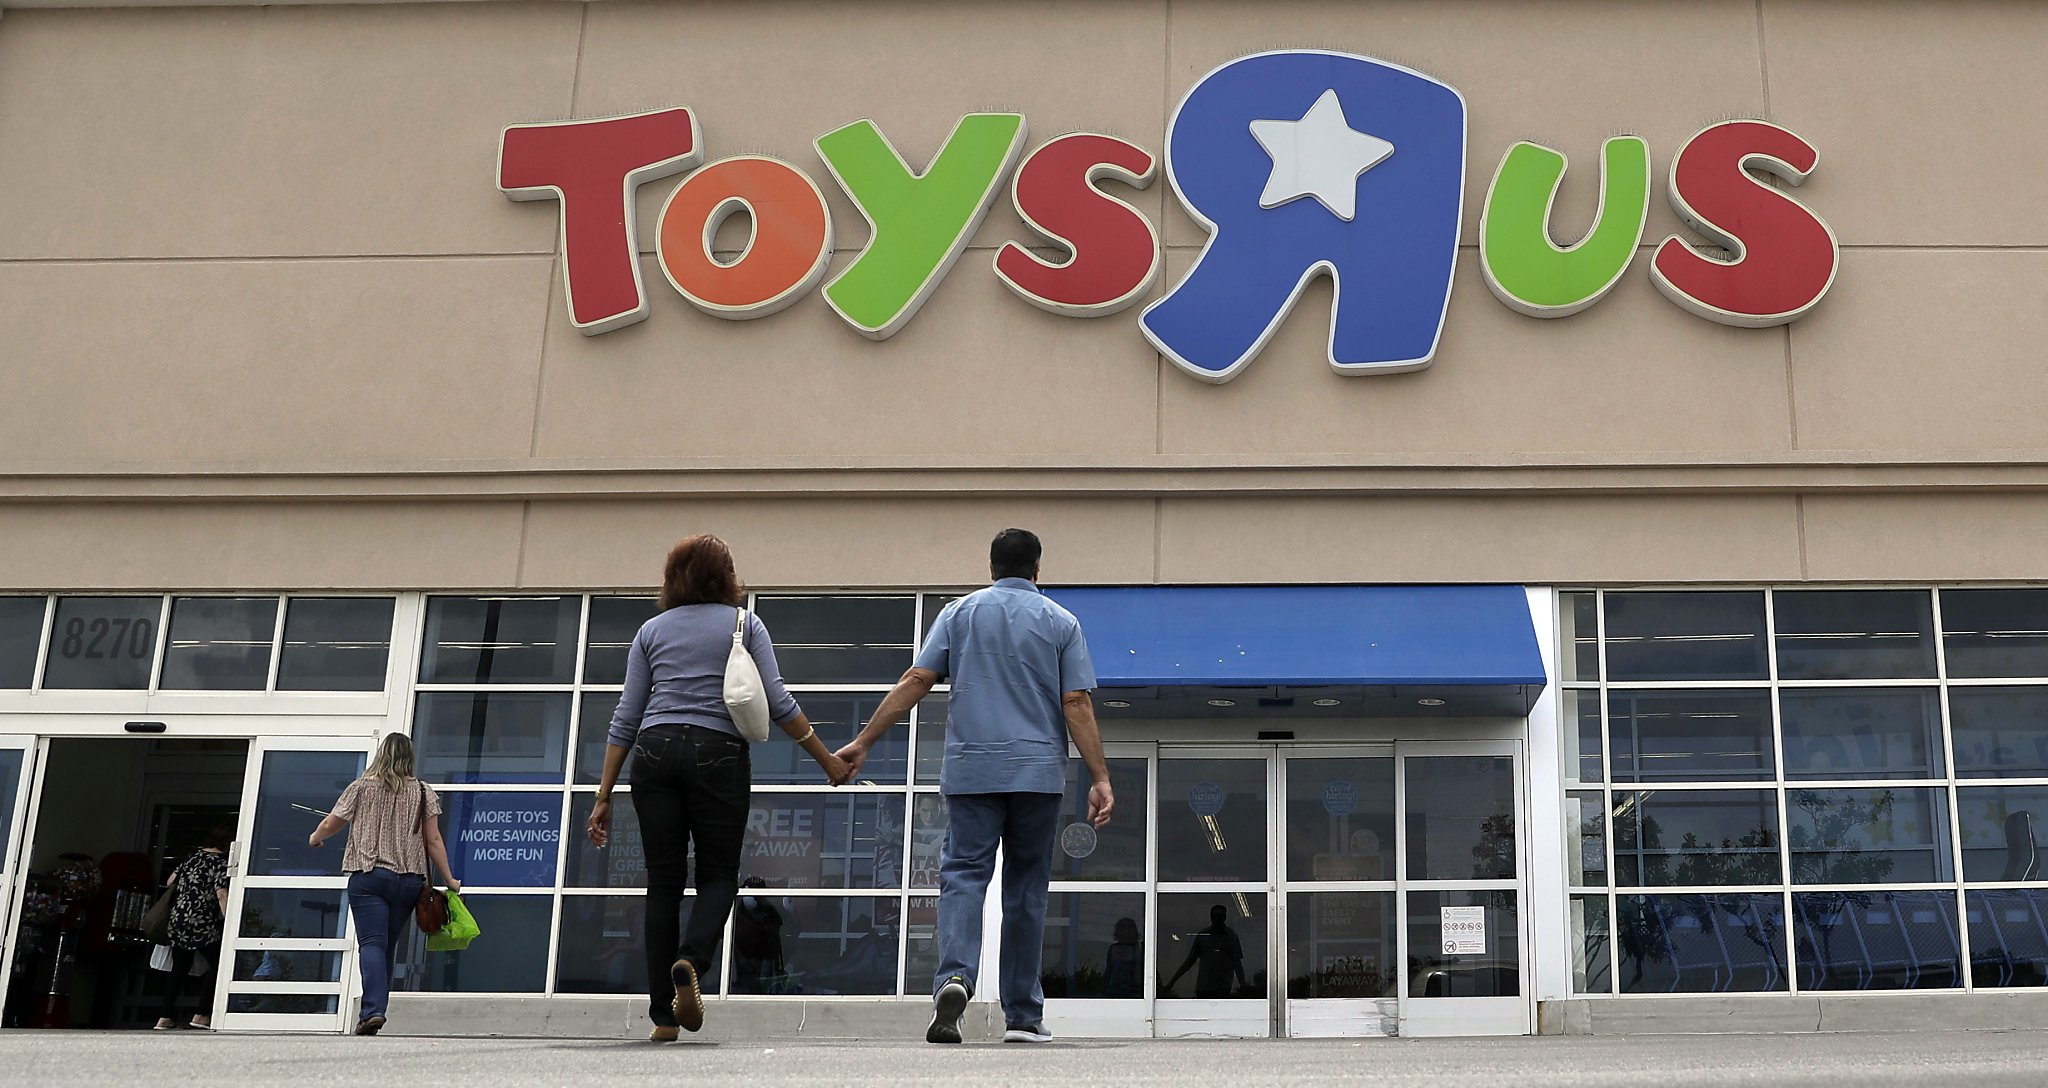 90s nostalgia - did toys r us fail - To Sus 8270 More Toys More Savings More Fun Ree Away Ung Gre Ety A aut Whi Event Layaway